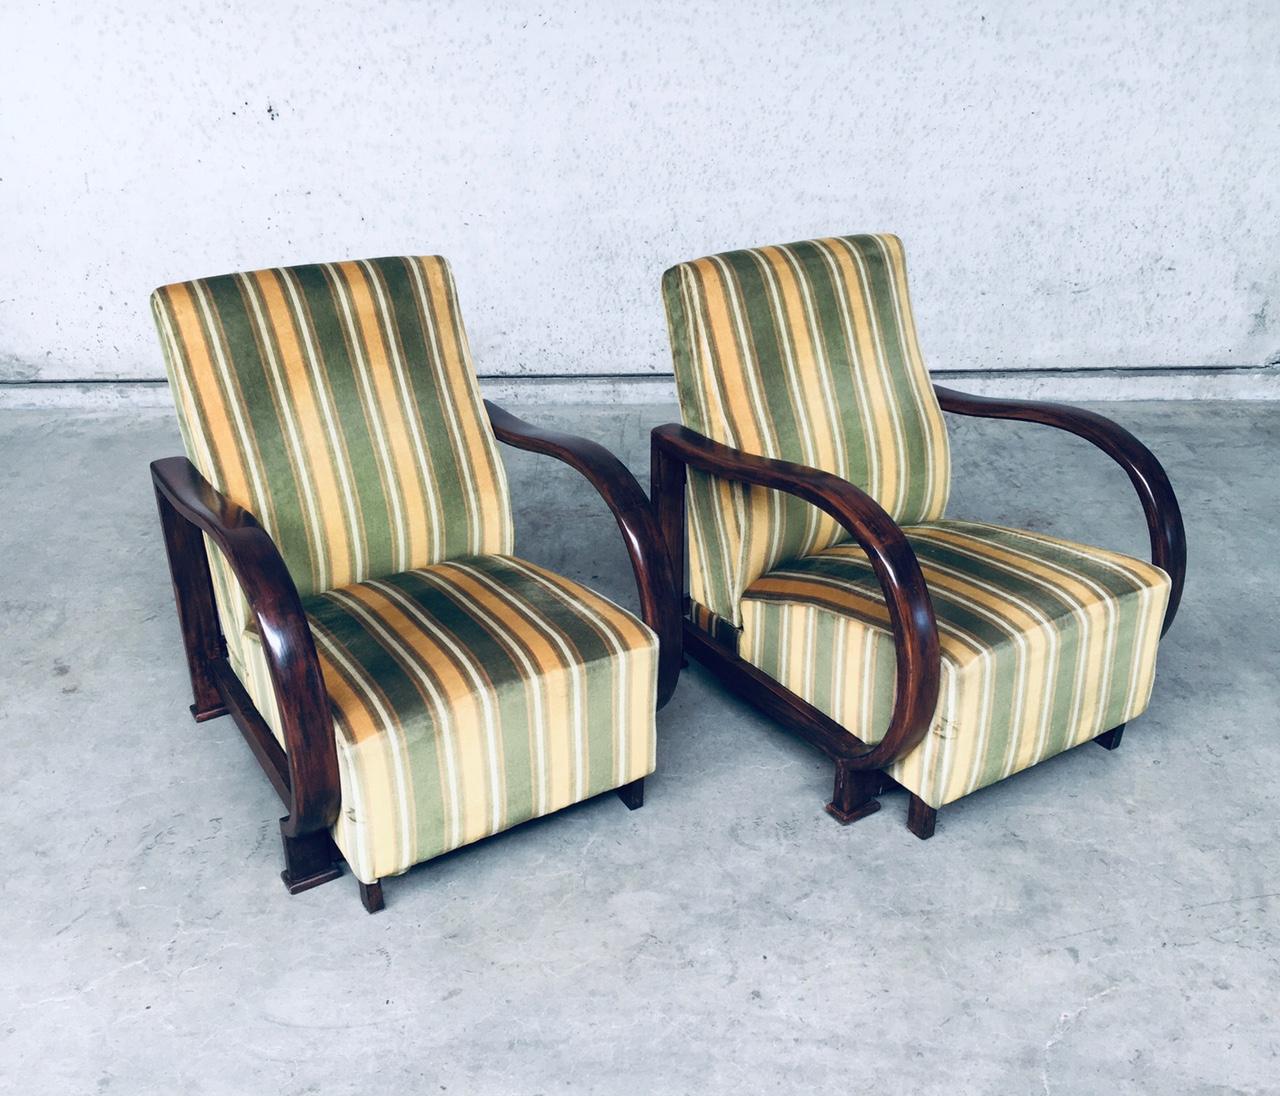 Vintage Art Deco design reclining armchair fauteuil lounge chair set of 2, made in France, 1930's. Recliner bentwood armchair set. Striped velvet spring seat and back with bend walnut look arm rests and seat construction. Nice curled bended wooden